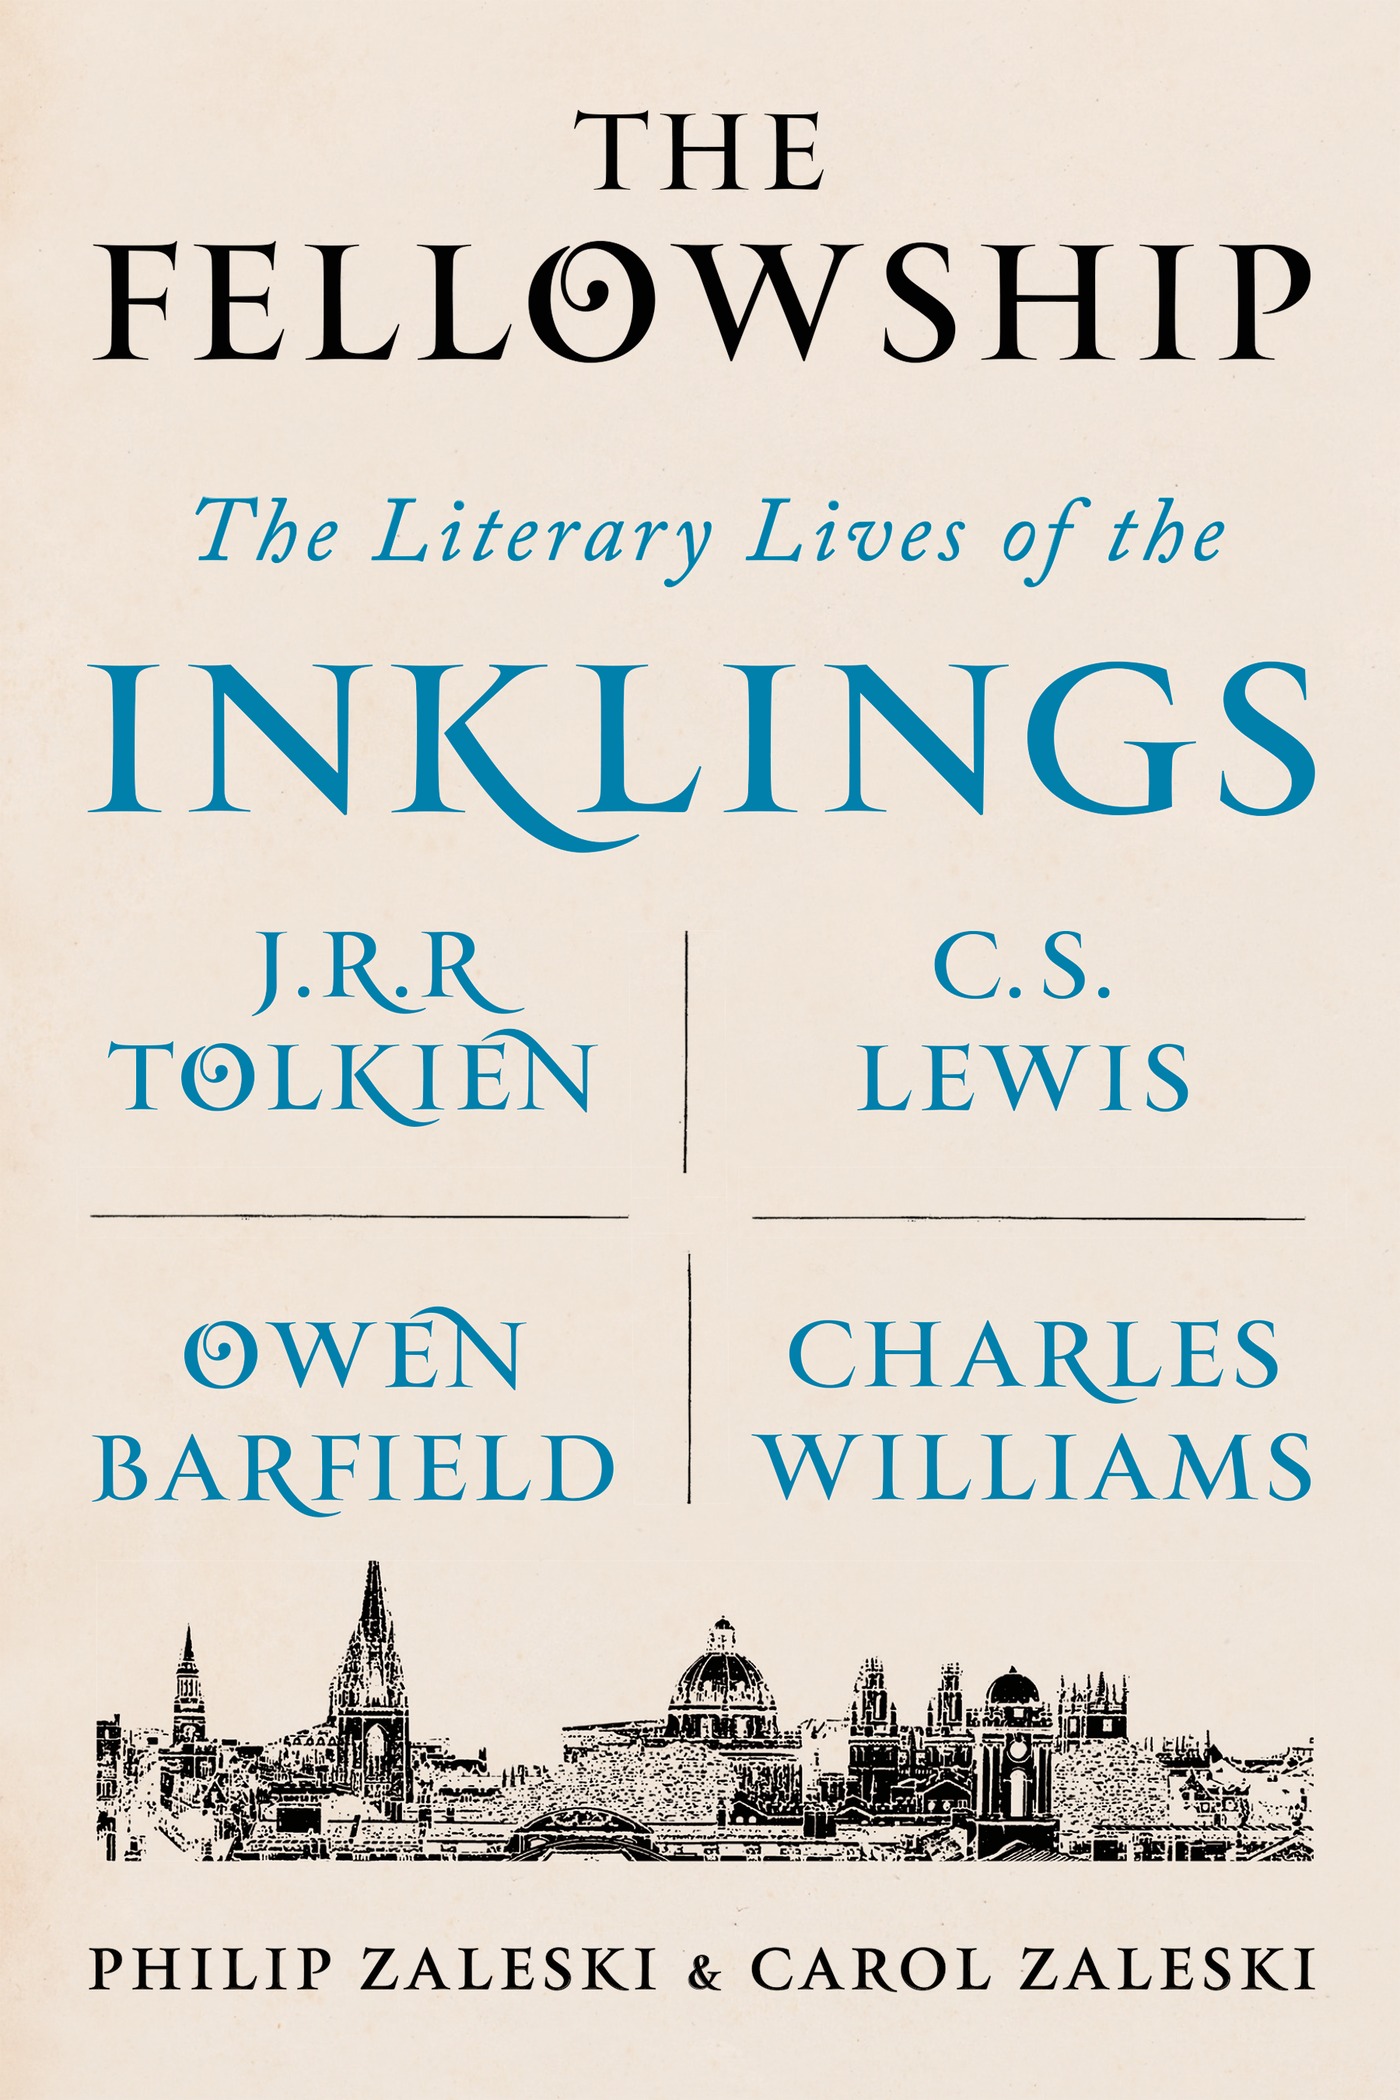 The fellowship : the literary lives of the Inklings: J.R.R. Tolkien, C. S. Lewis, Owen Barfield, Charles Williams cover image